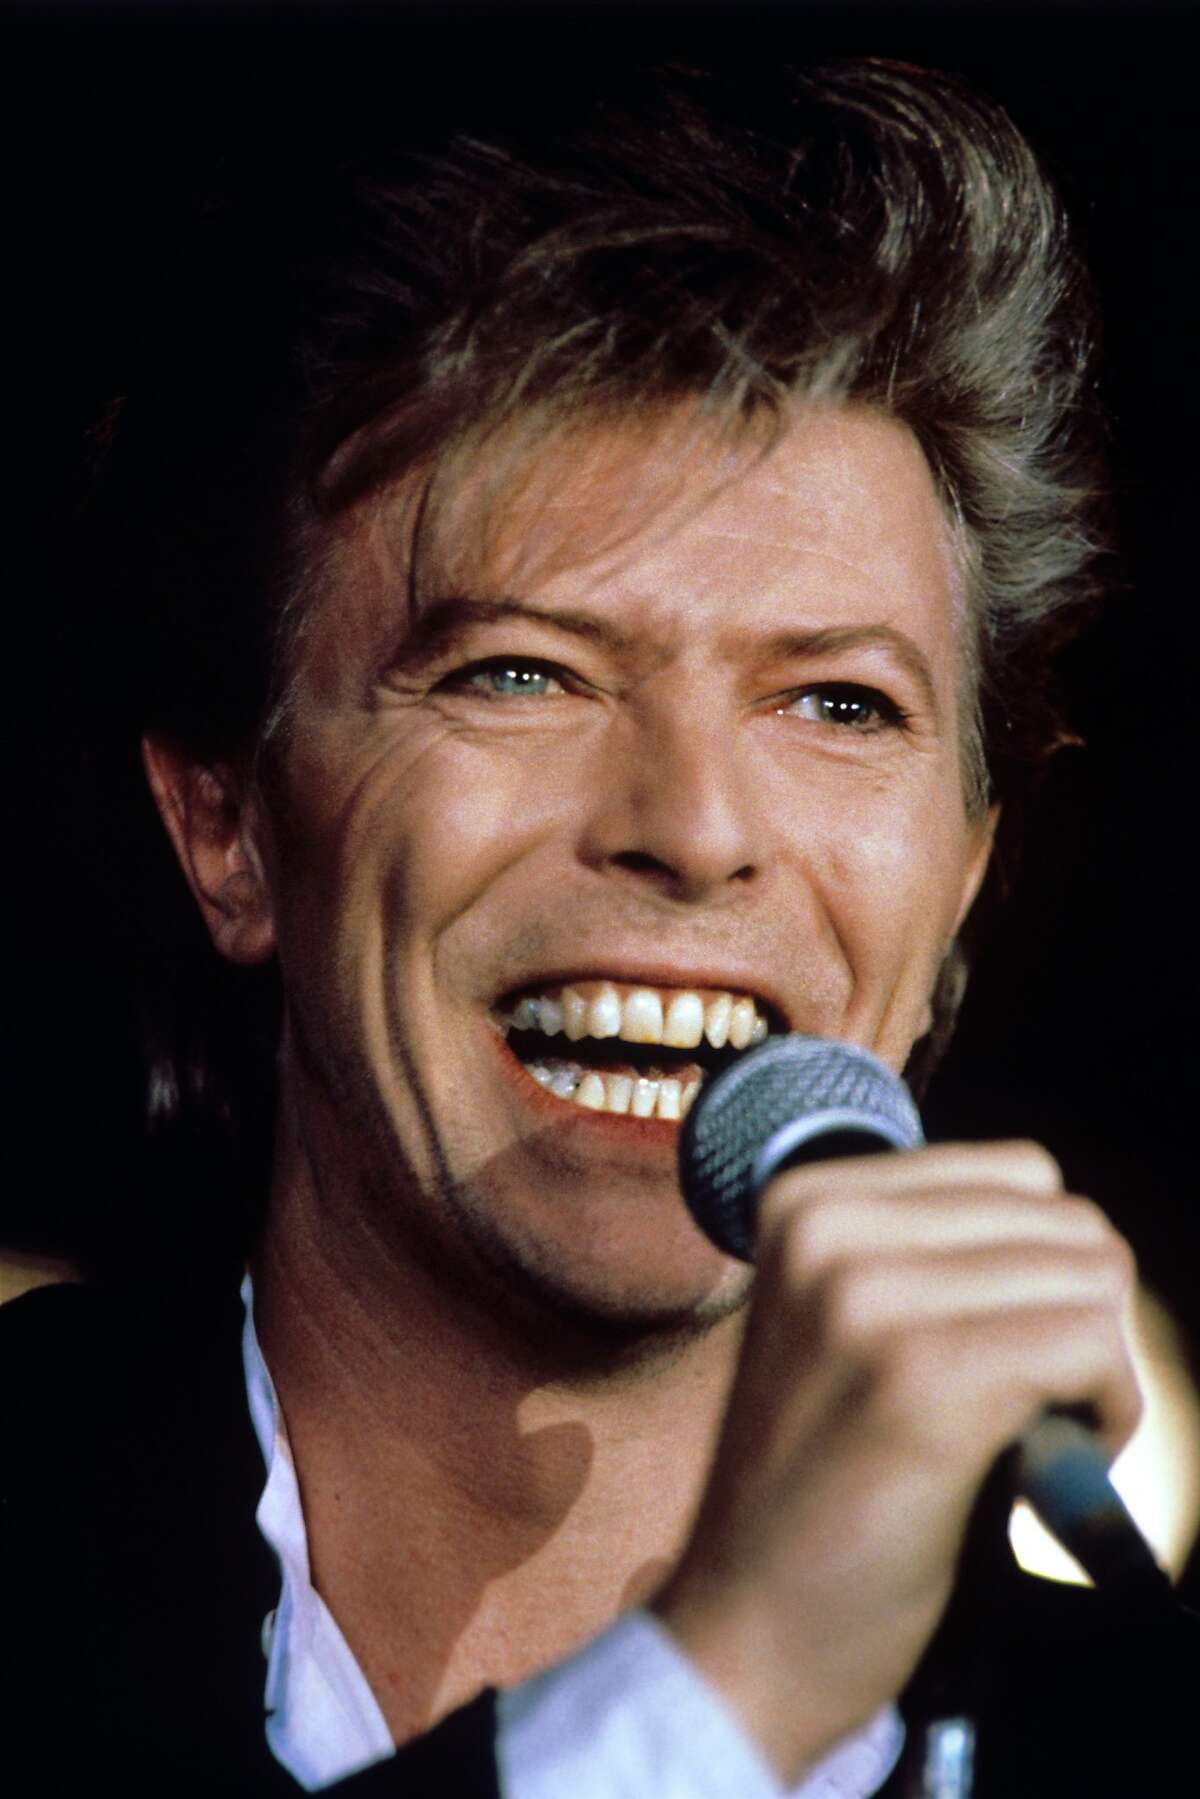 File photo dated March 20, 1987 of David Bowie, who has died following an 18-month battle with cancer. (PA Wire/Zuma Press/TNS)